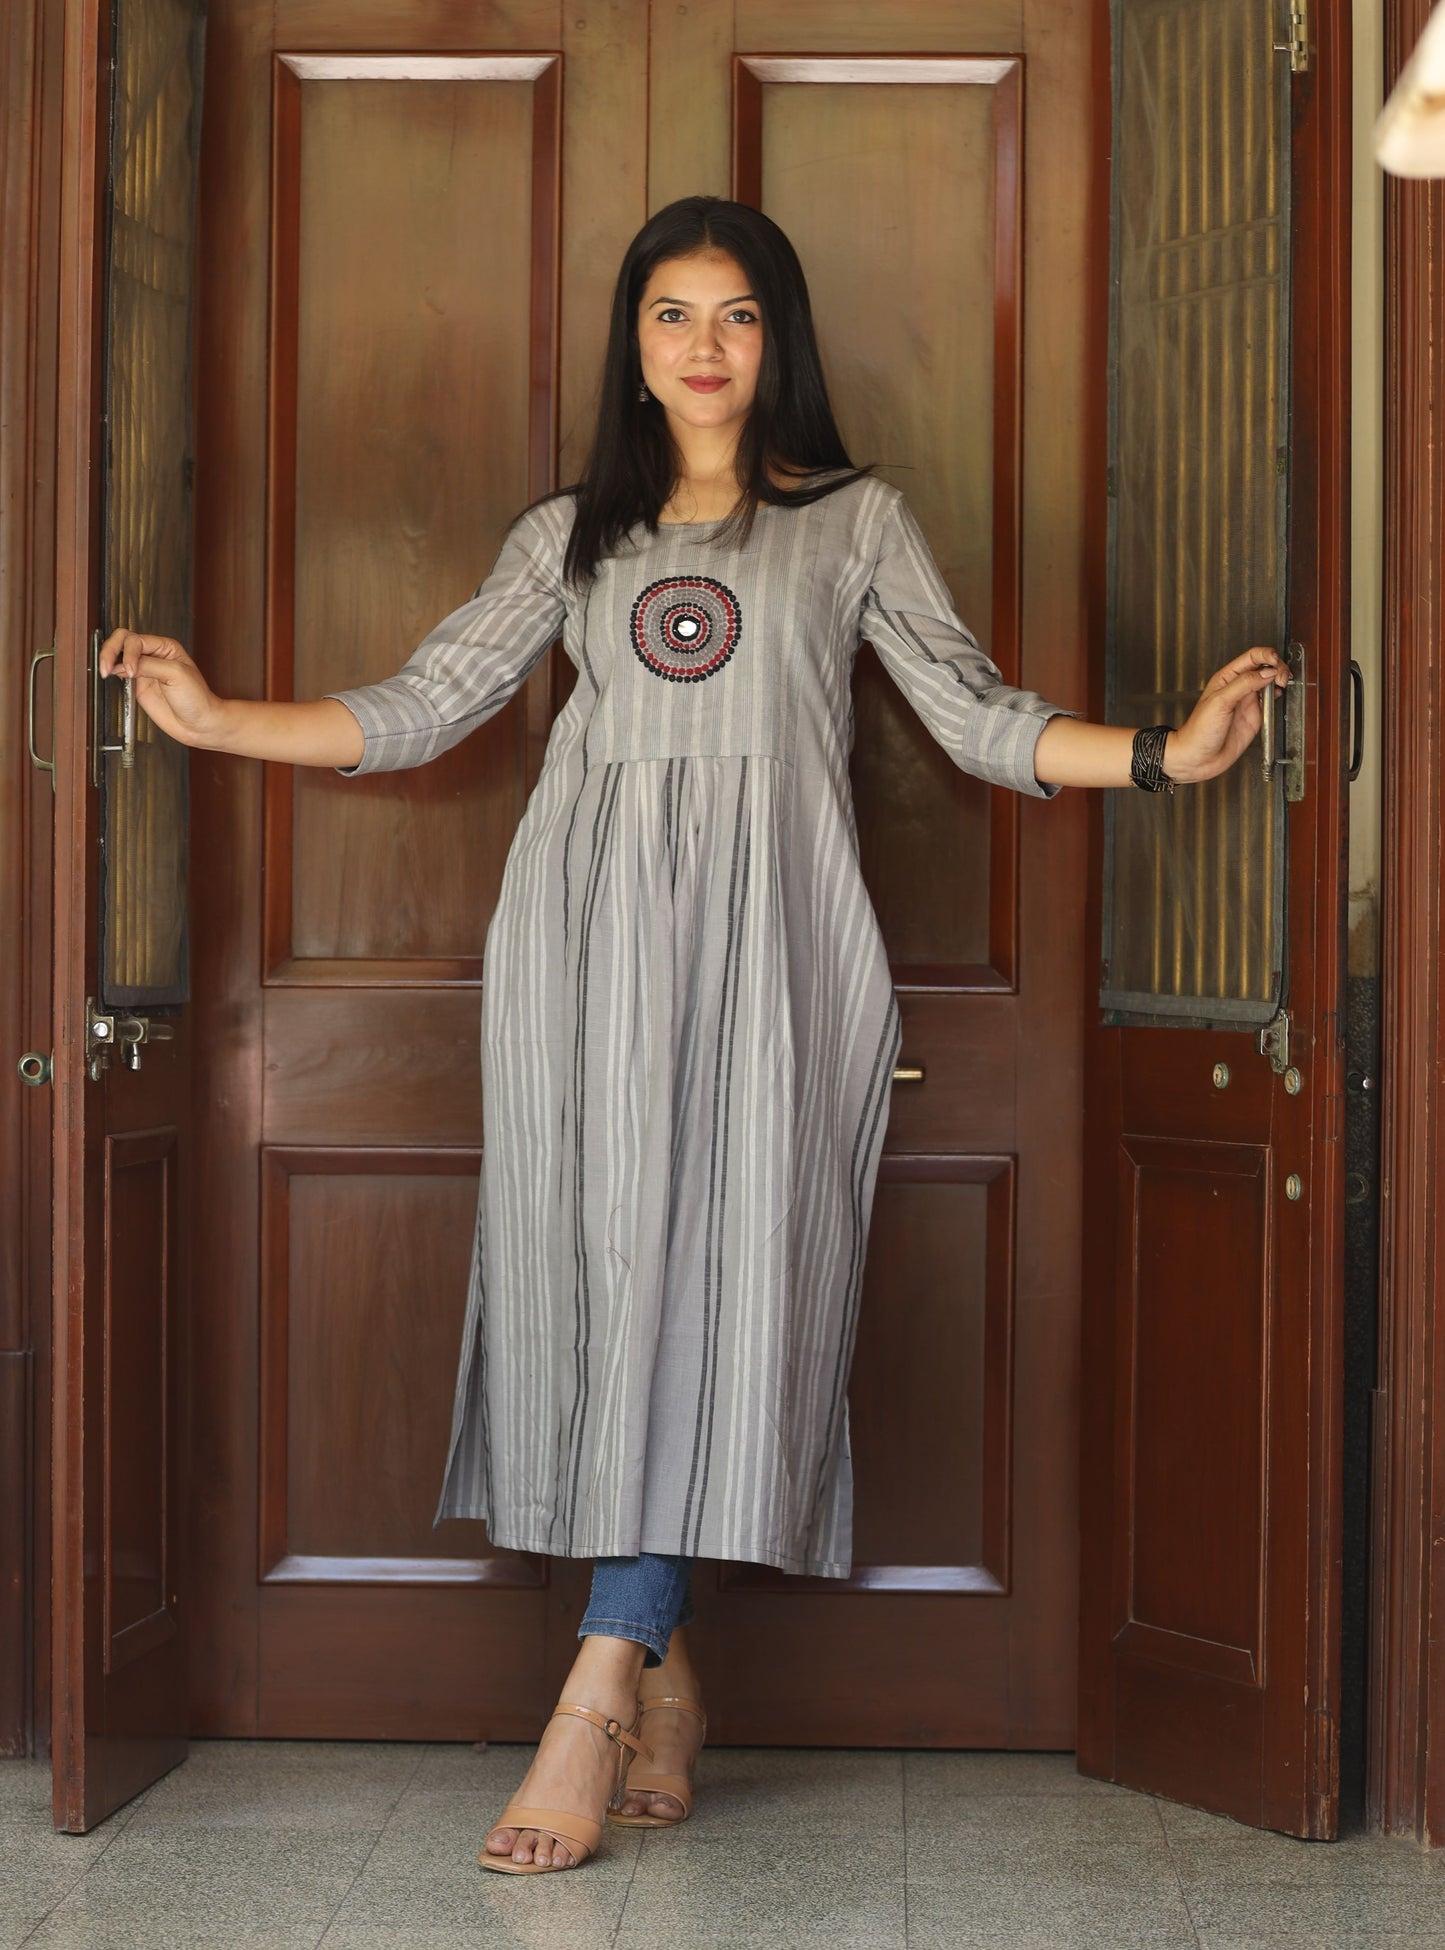 Women's Cotton Round Neck 3/4 Sleeve Embroderied A-Line Kurta Wedding Anniversary Events Everyday-Color [Grey]